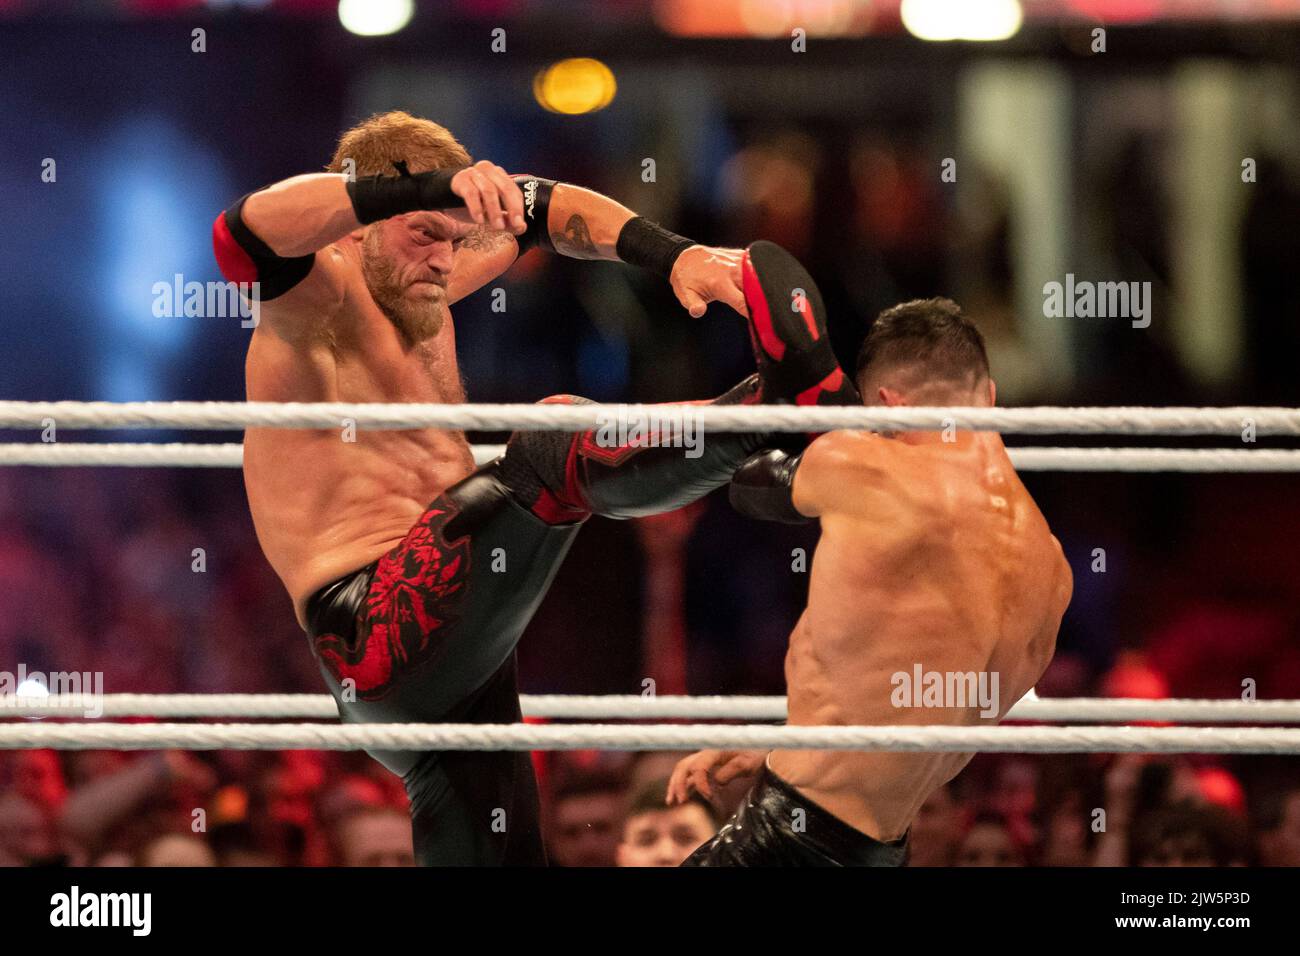 Cardiff, Wales, UK. 3rd Sep, 2022. Edge & Rey Mysterio vs. Finn Bálor & Damian Priest during the WWE ‘Clash At The Castle' wrestling event at the Principality Stadium in Cardiff. Credit: Mark Hawkins/Alamy Live News Stock Photo